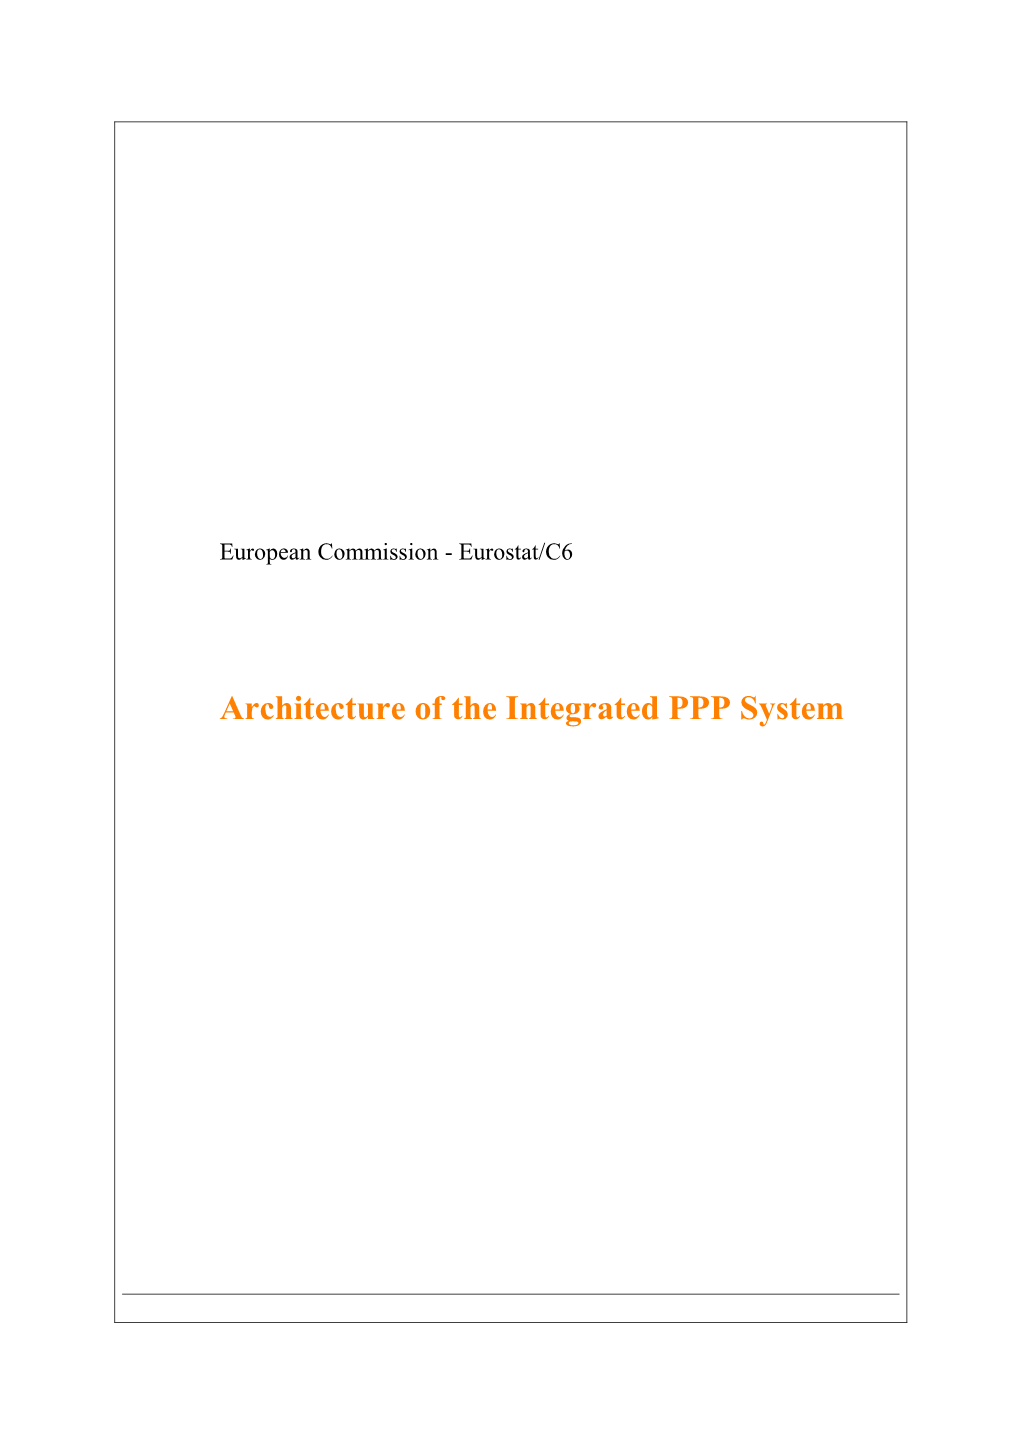 Architecture of the Integrated PPP System